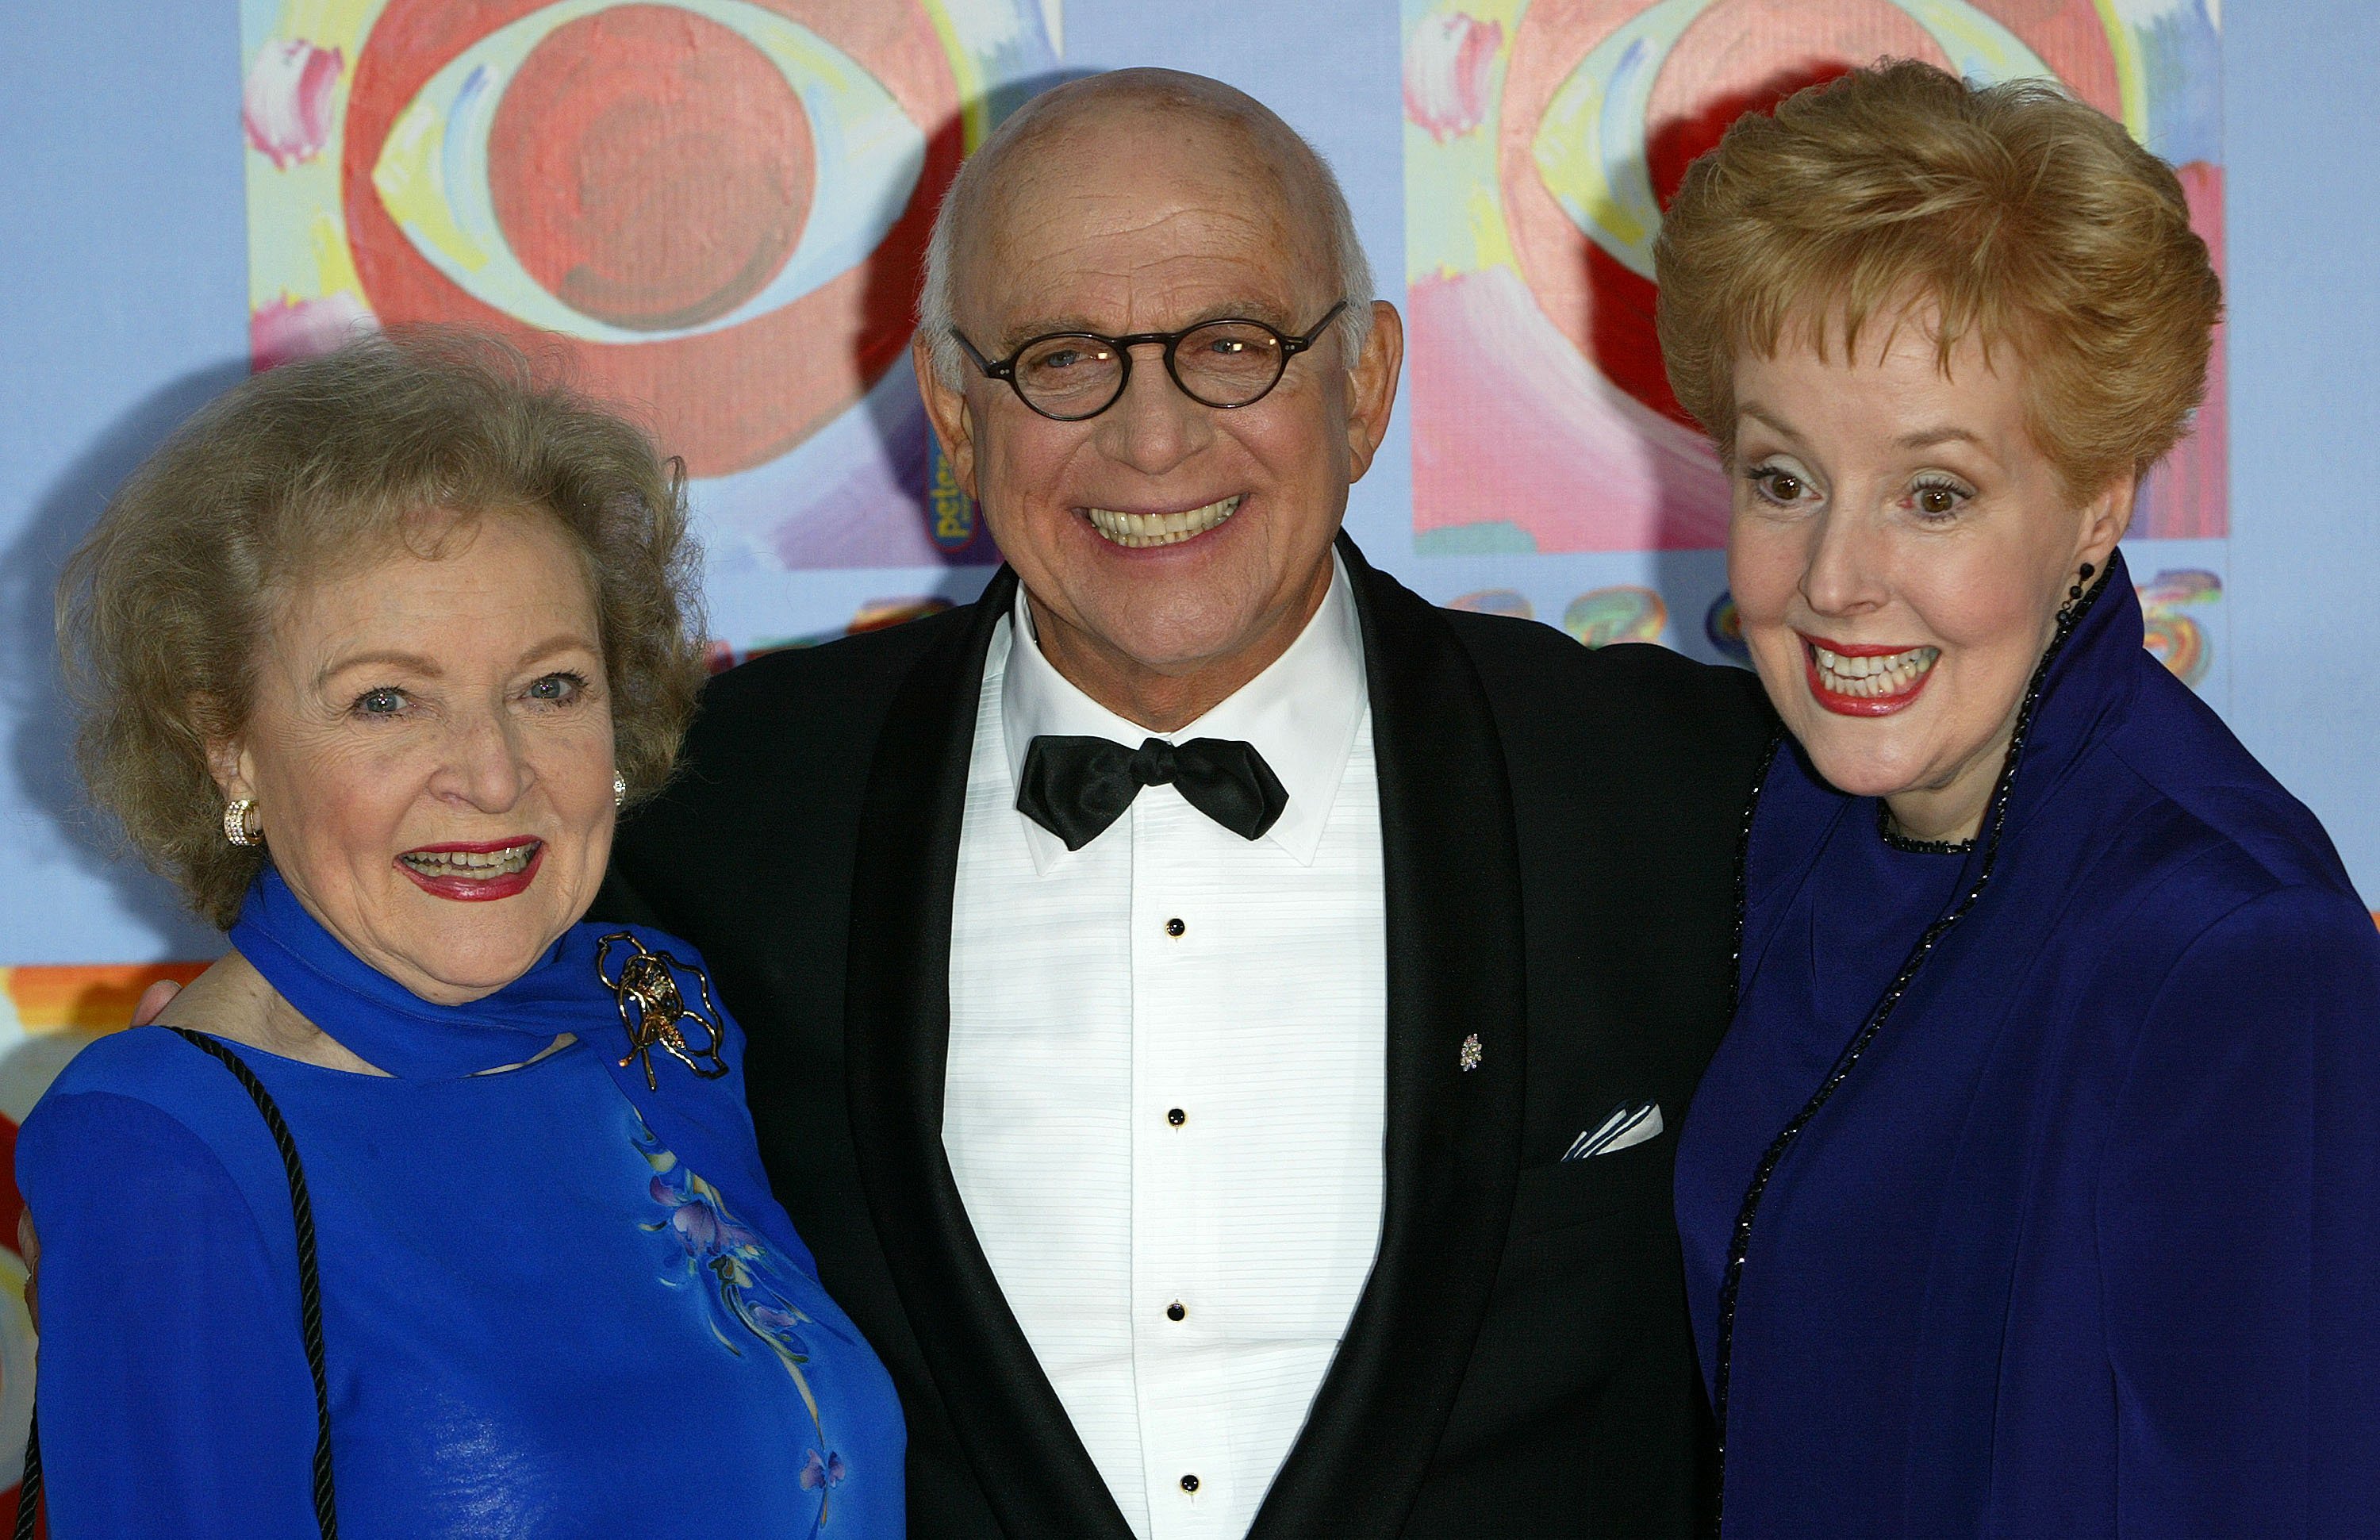 From left to right, Betty White, Gavin Macleod and actress Georgia Engel at the 'CBS At 75' celebration at the Hammerstein Ballroom in 2003. Photo: Getty Images